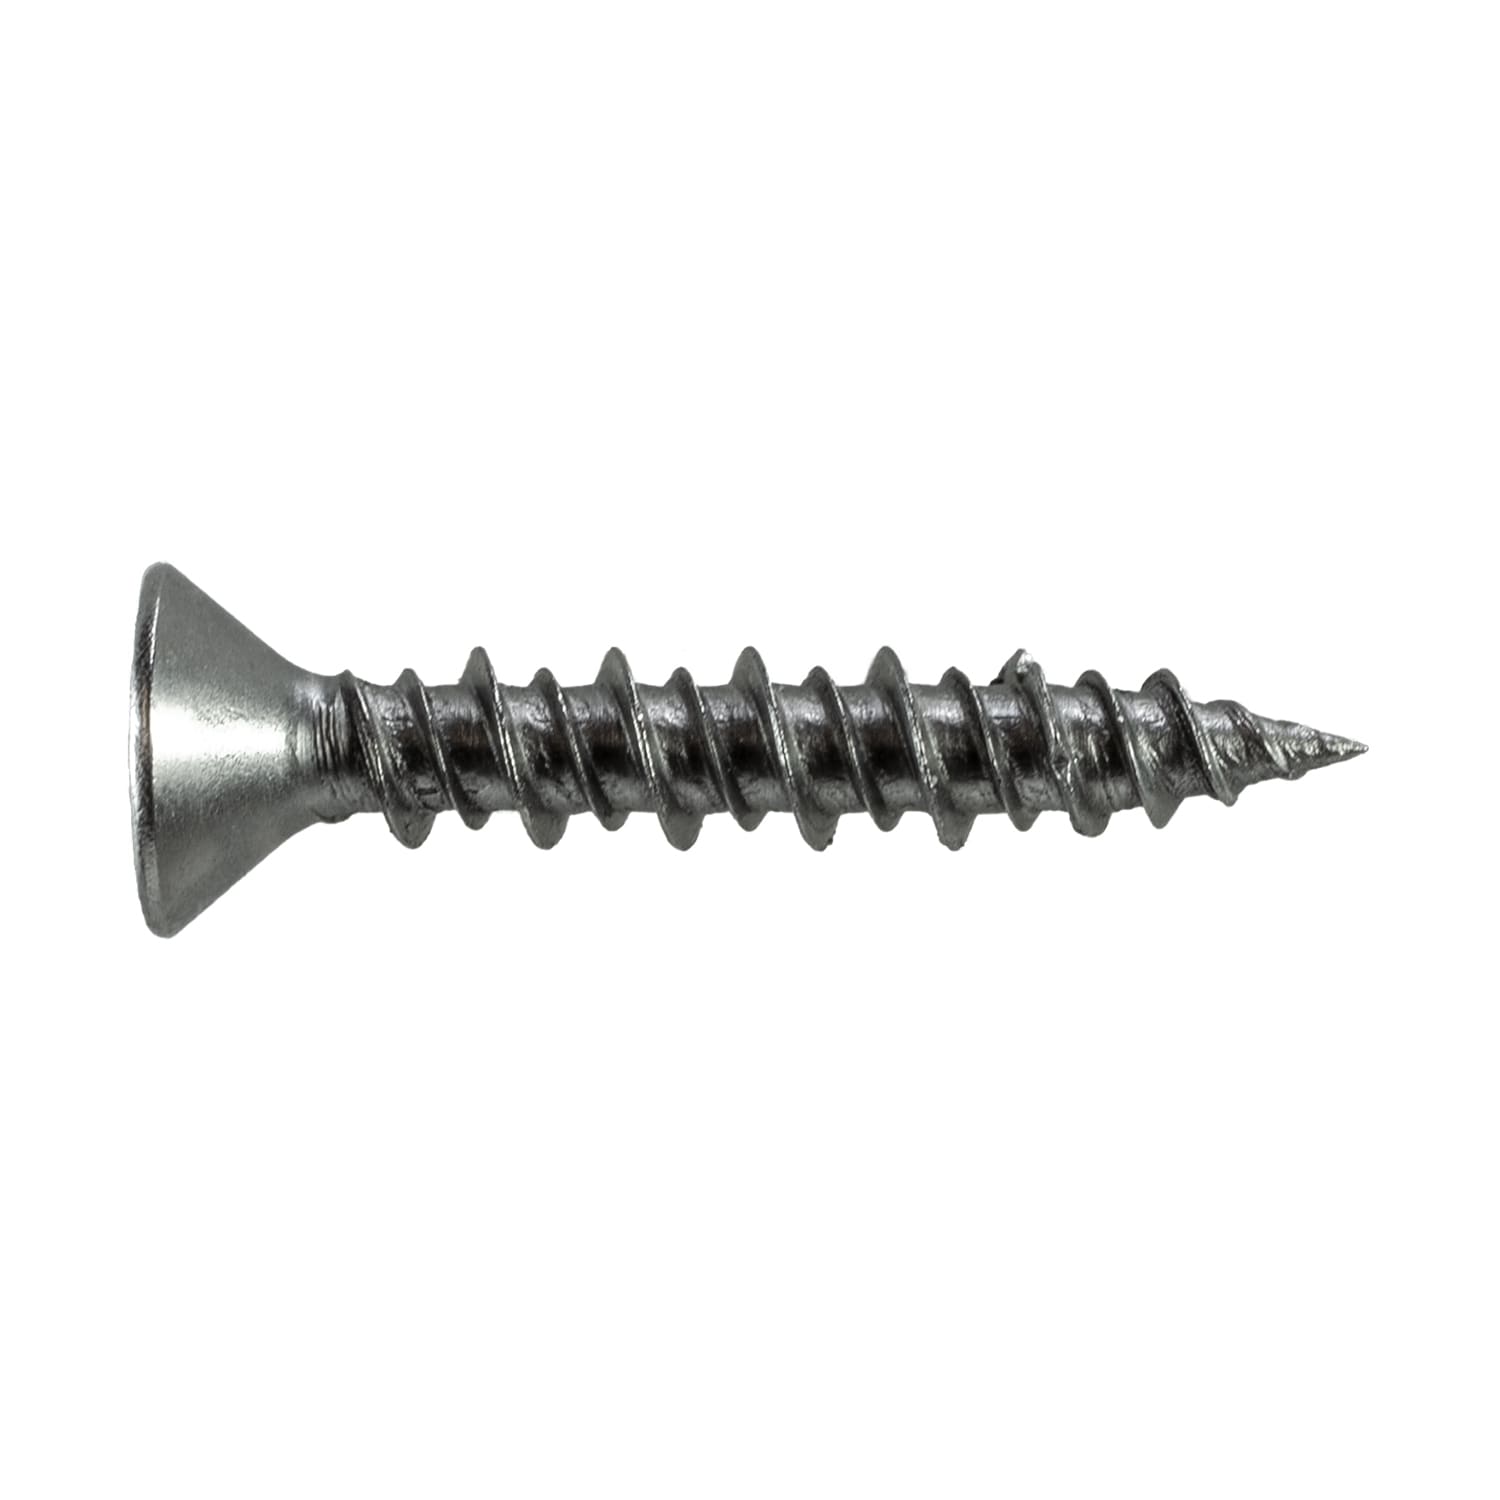 A2 Stainless Steel Wood Screw Slotted Wood Screw 12 x 11/2" 50-5.5 x 40mm 